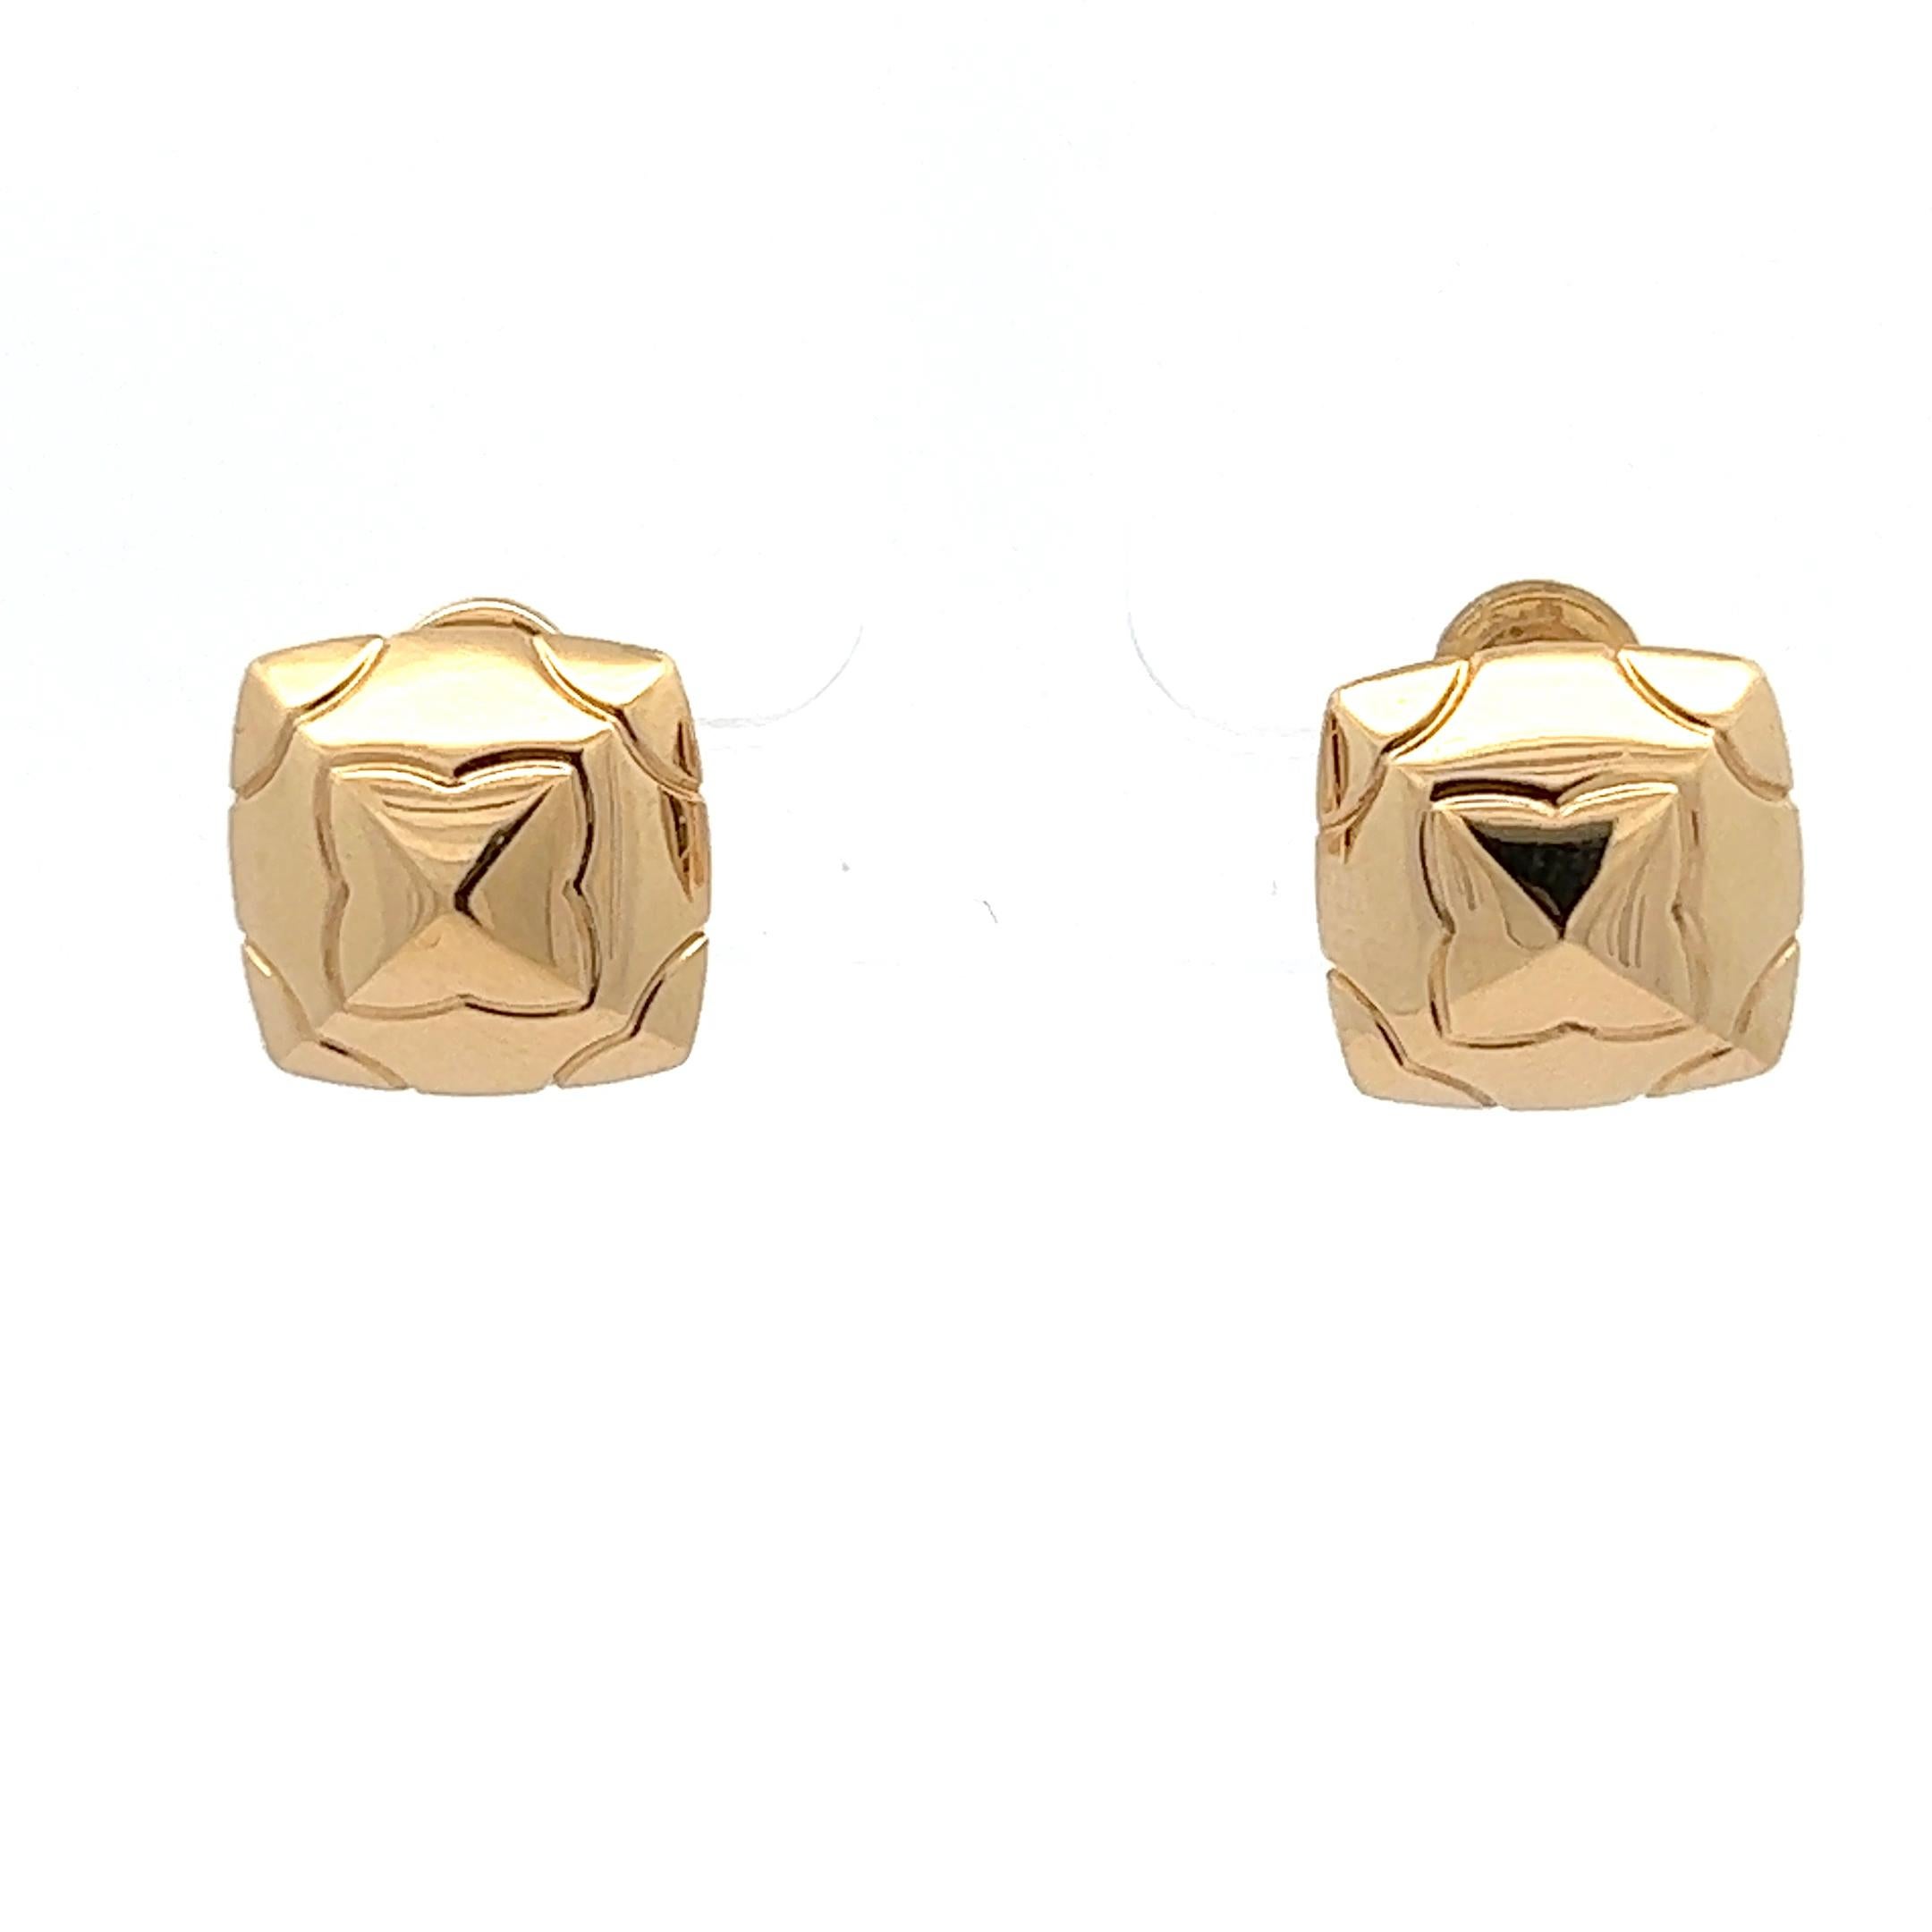 A pair of 18k yellow gold 